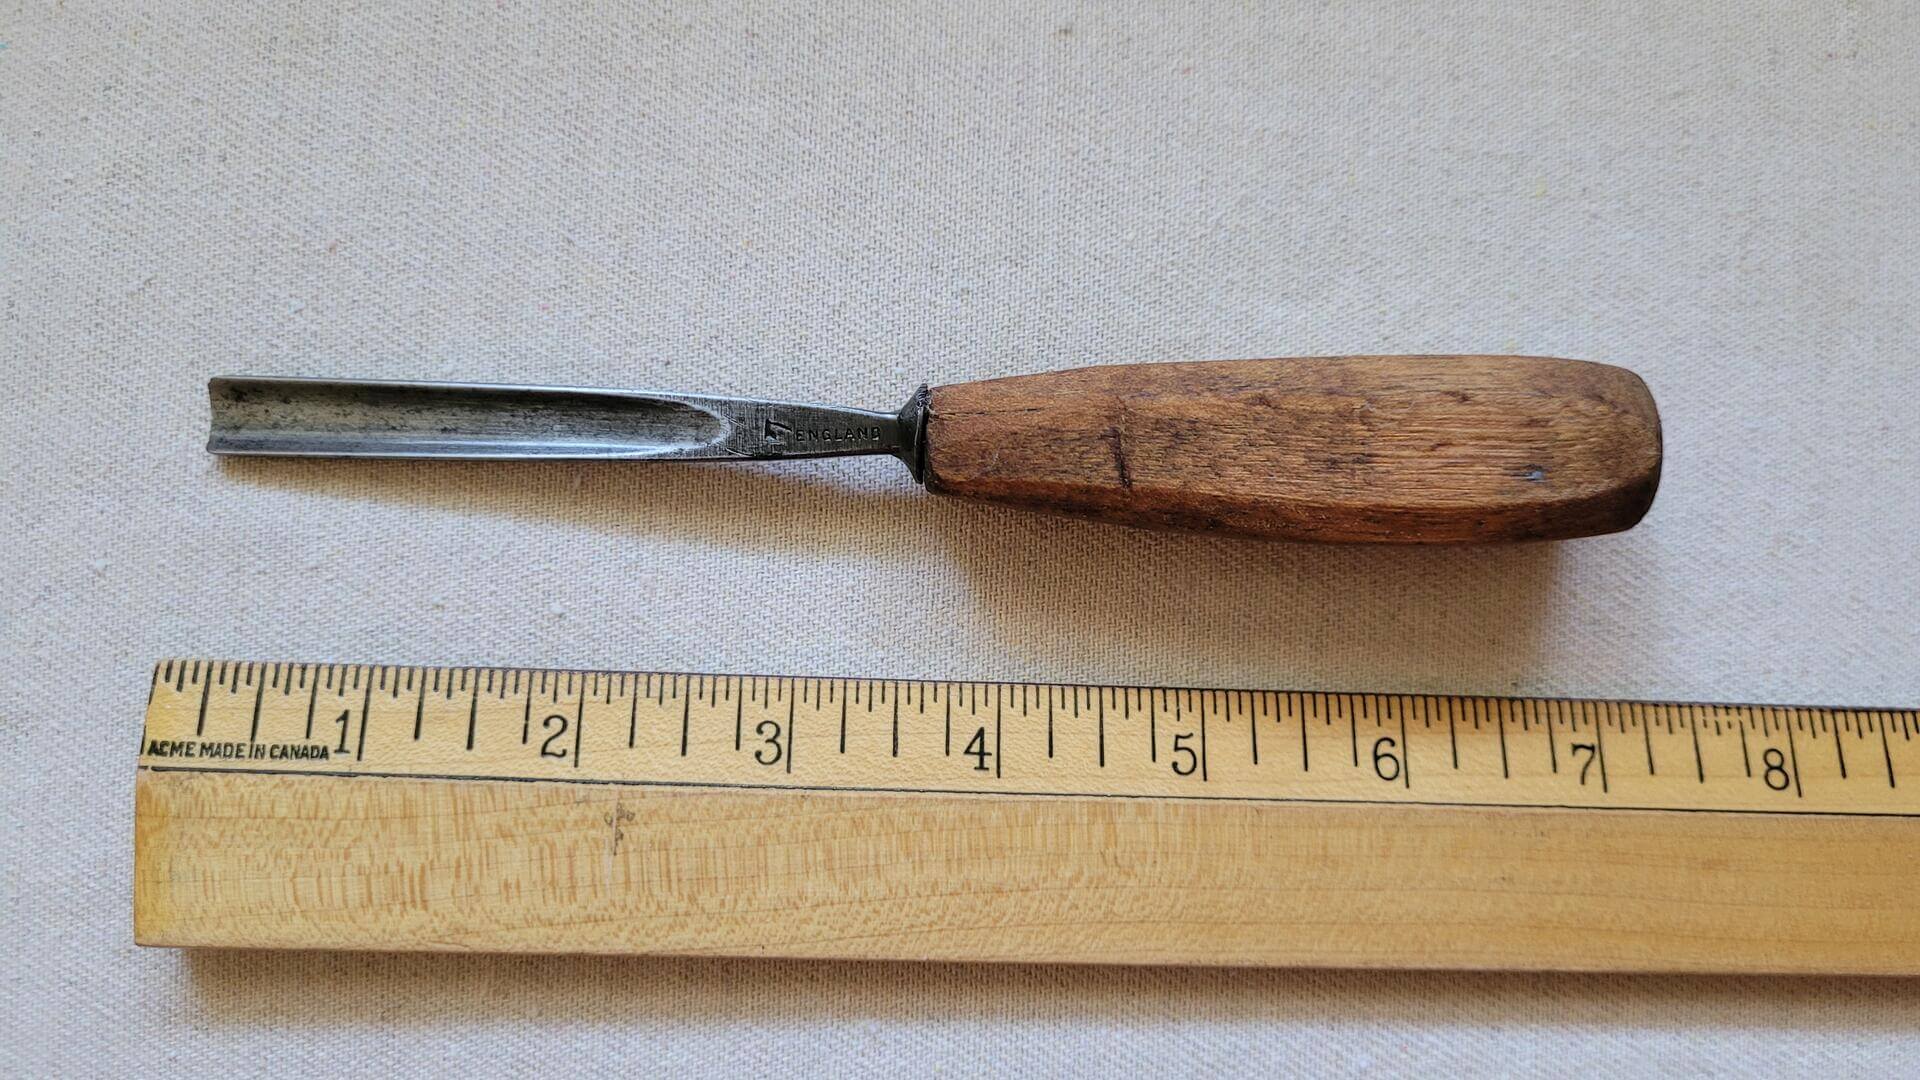 Antique S.J. Addis wood carving gouge cast steel chisel - Rare vintage 19th century made in London England collectible carpentry and woodworking edge tools